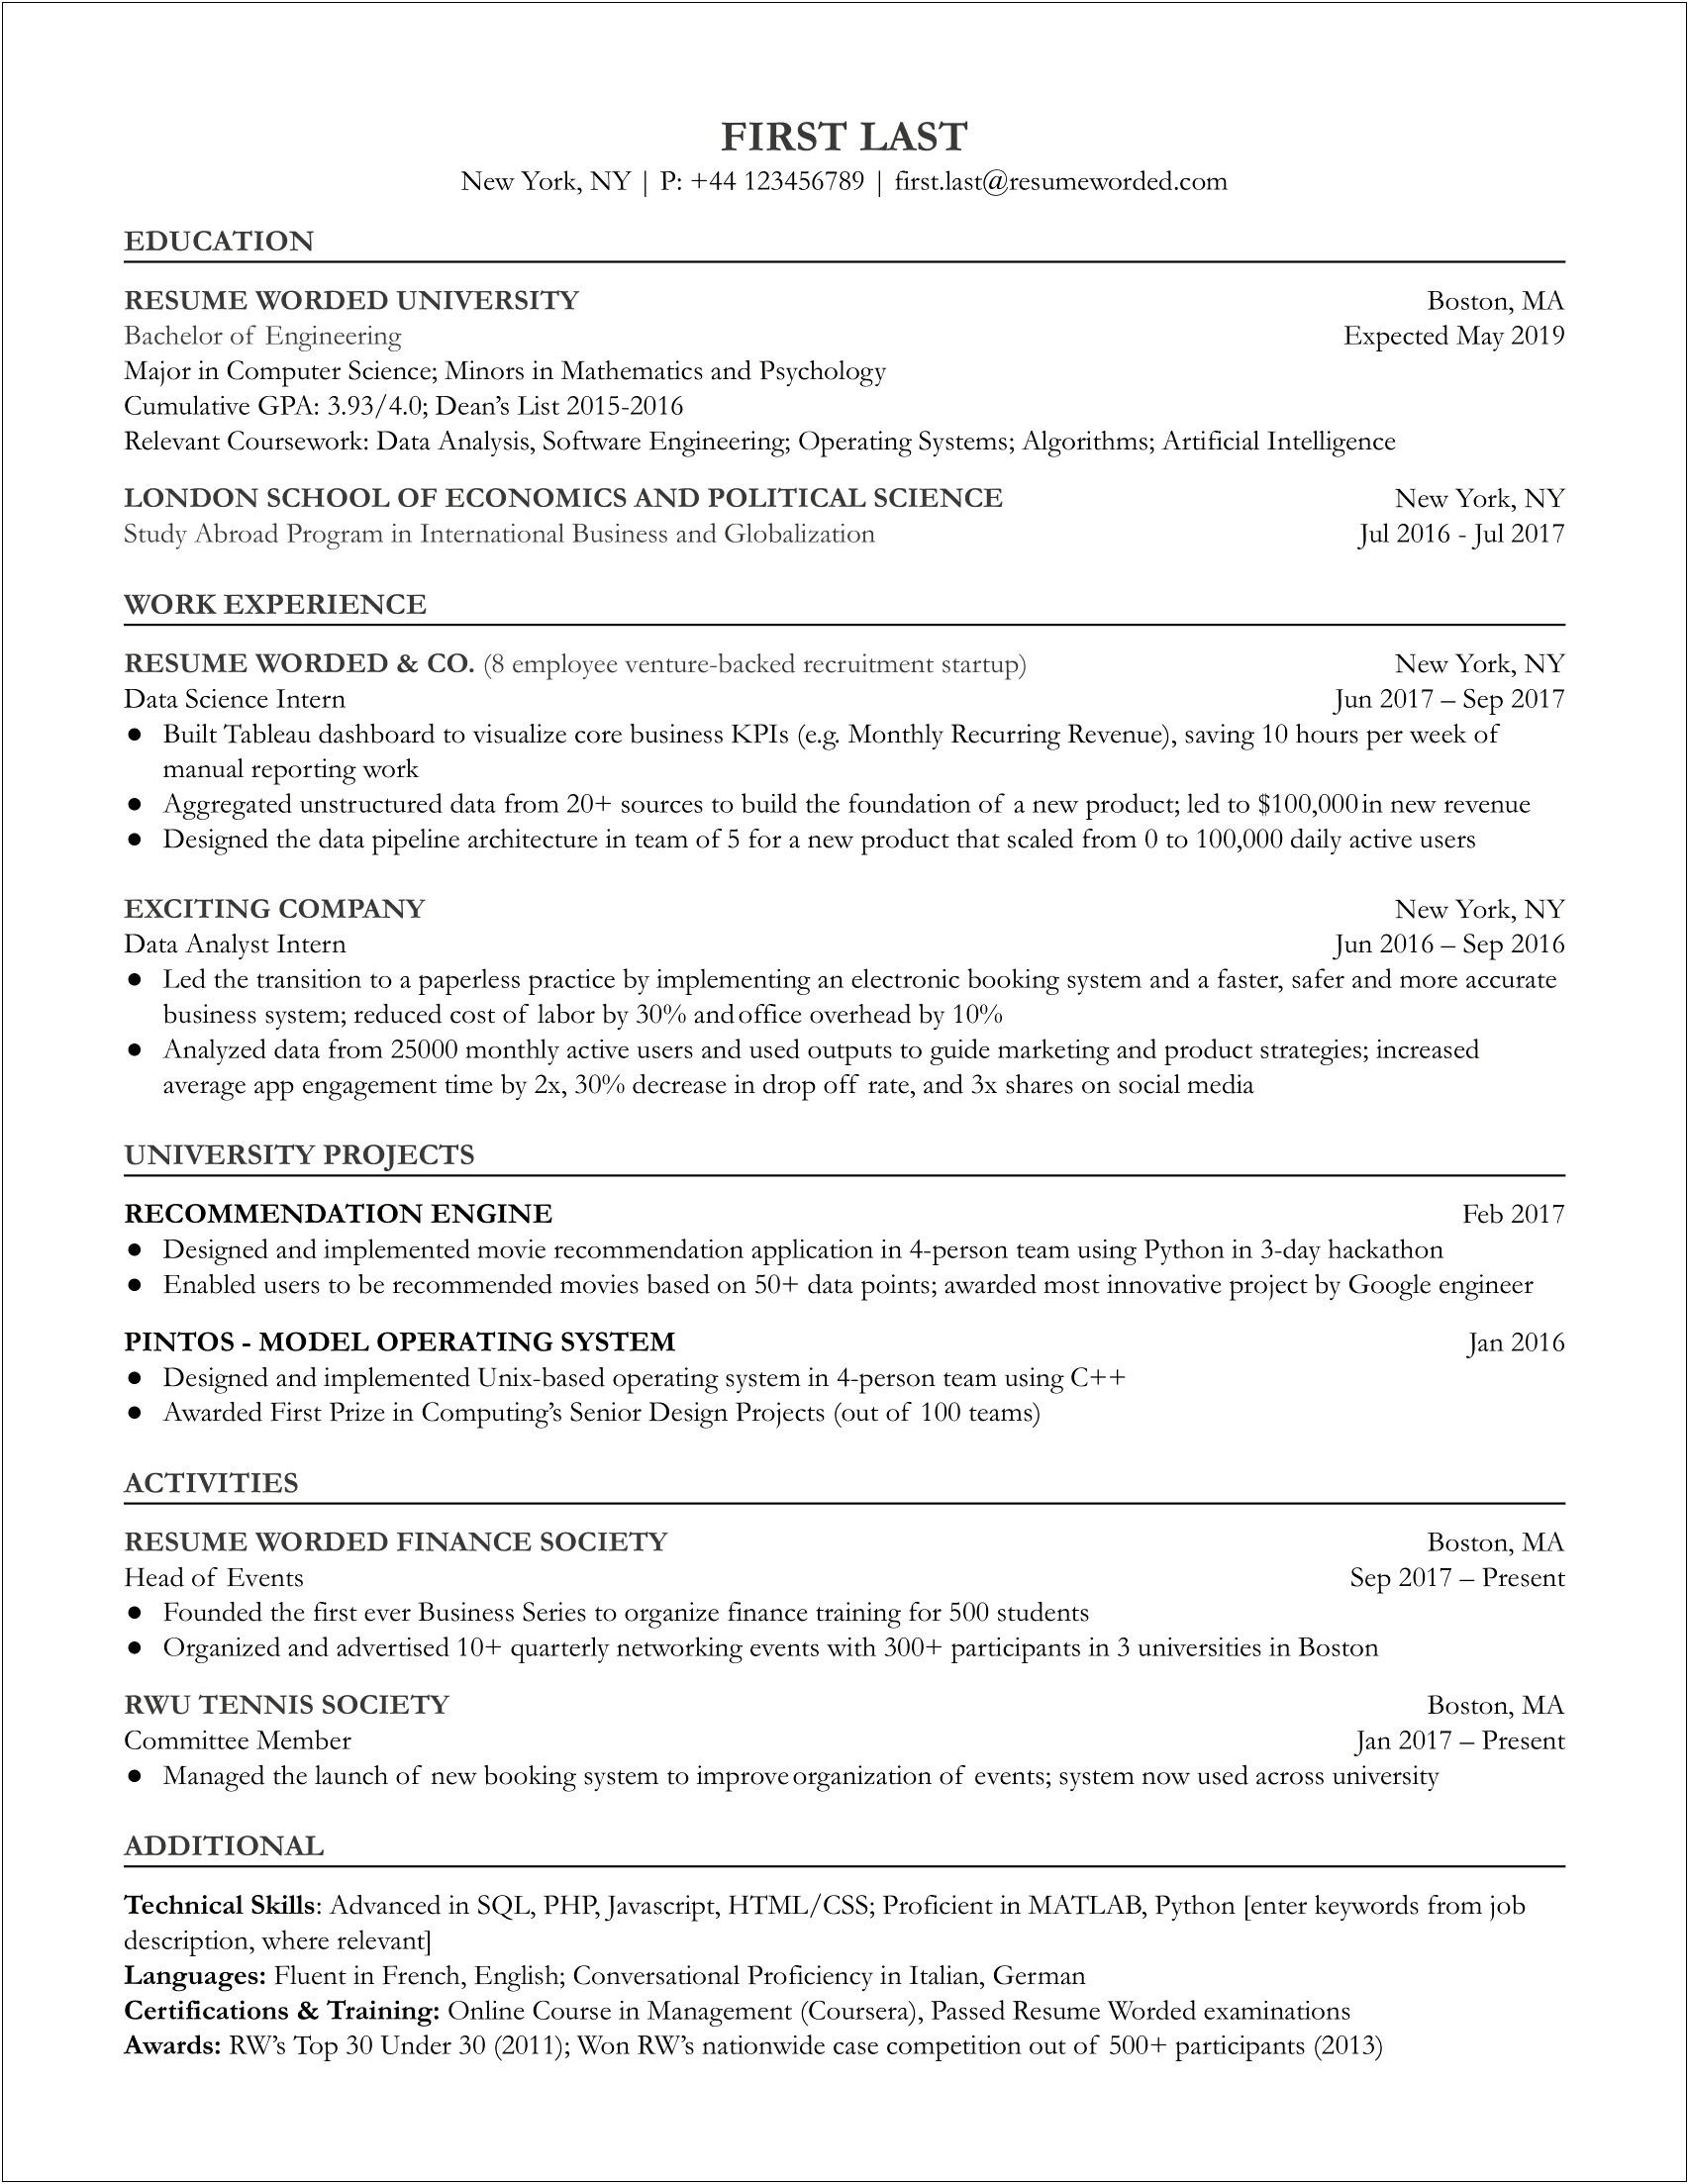 Getting Entry Level Job With No Resume